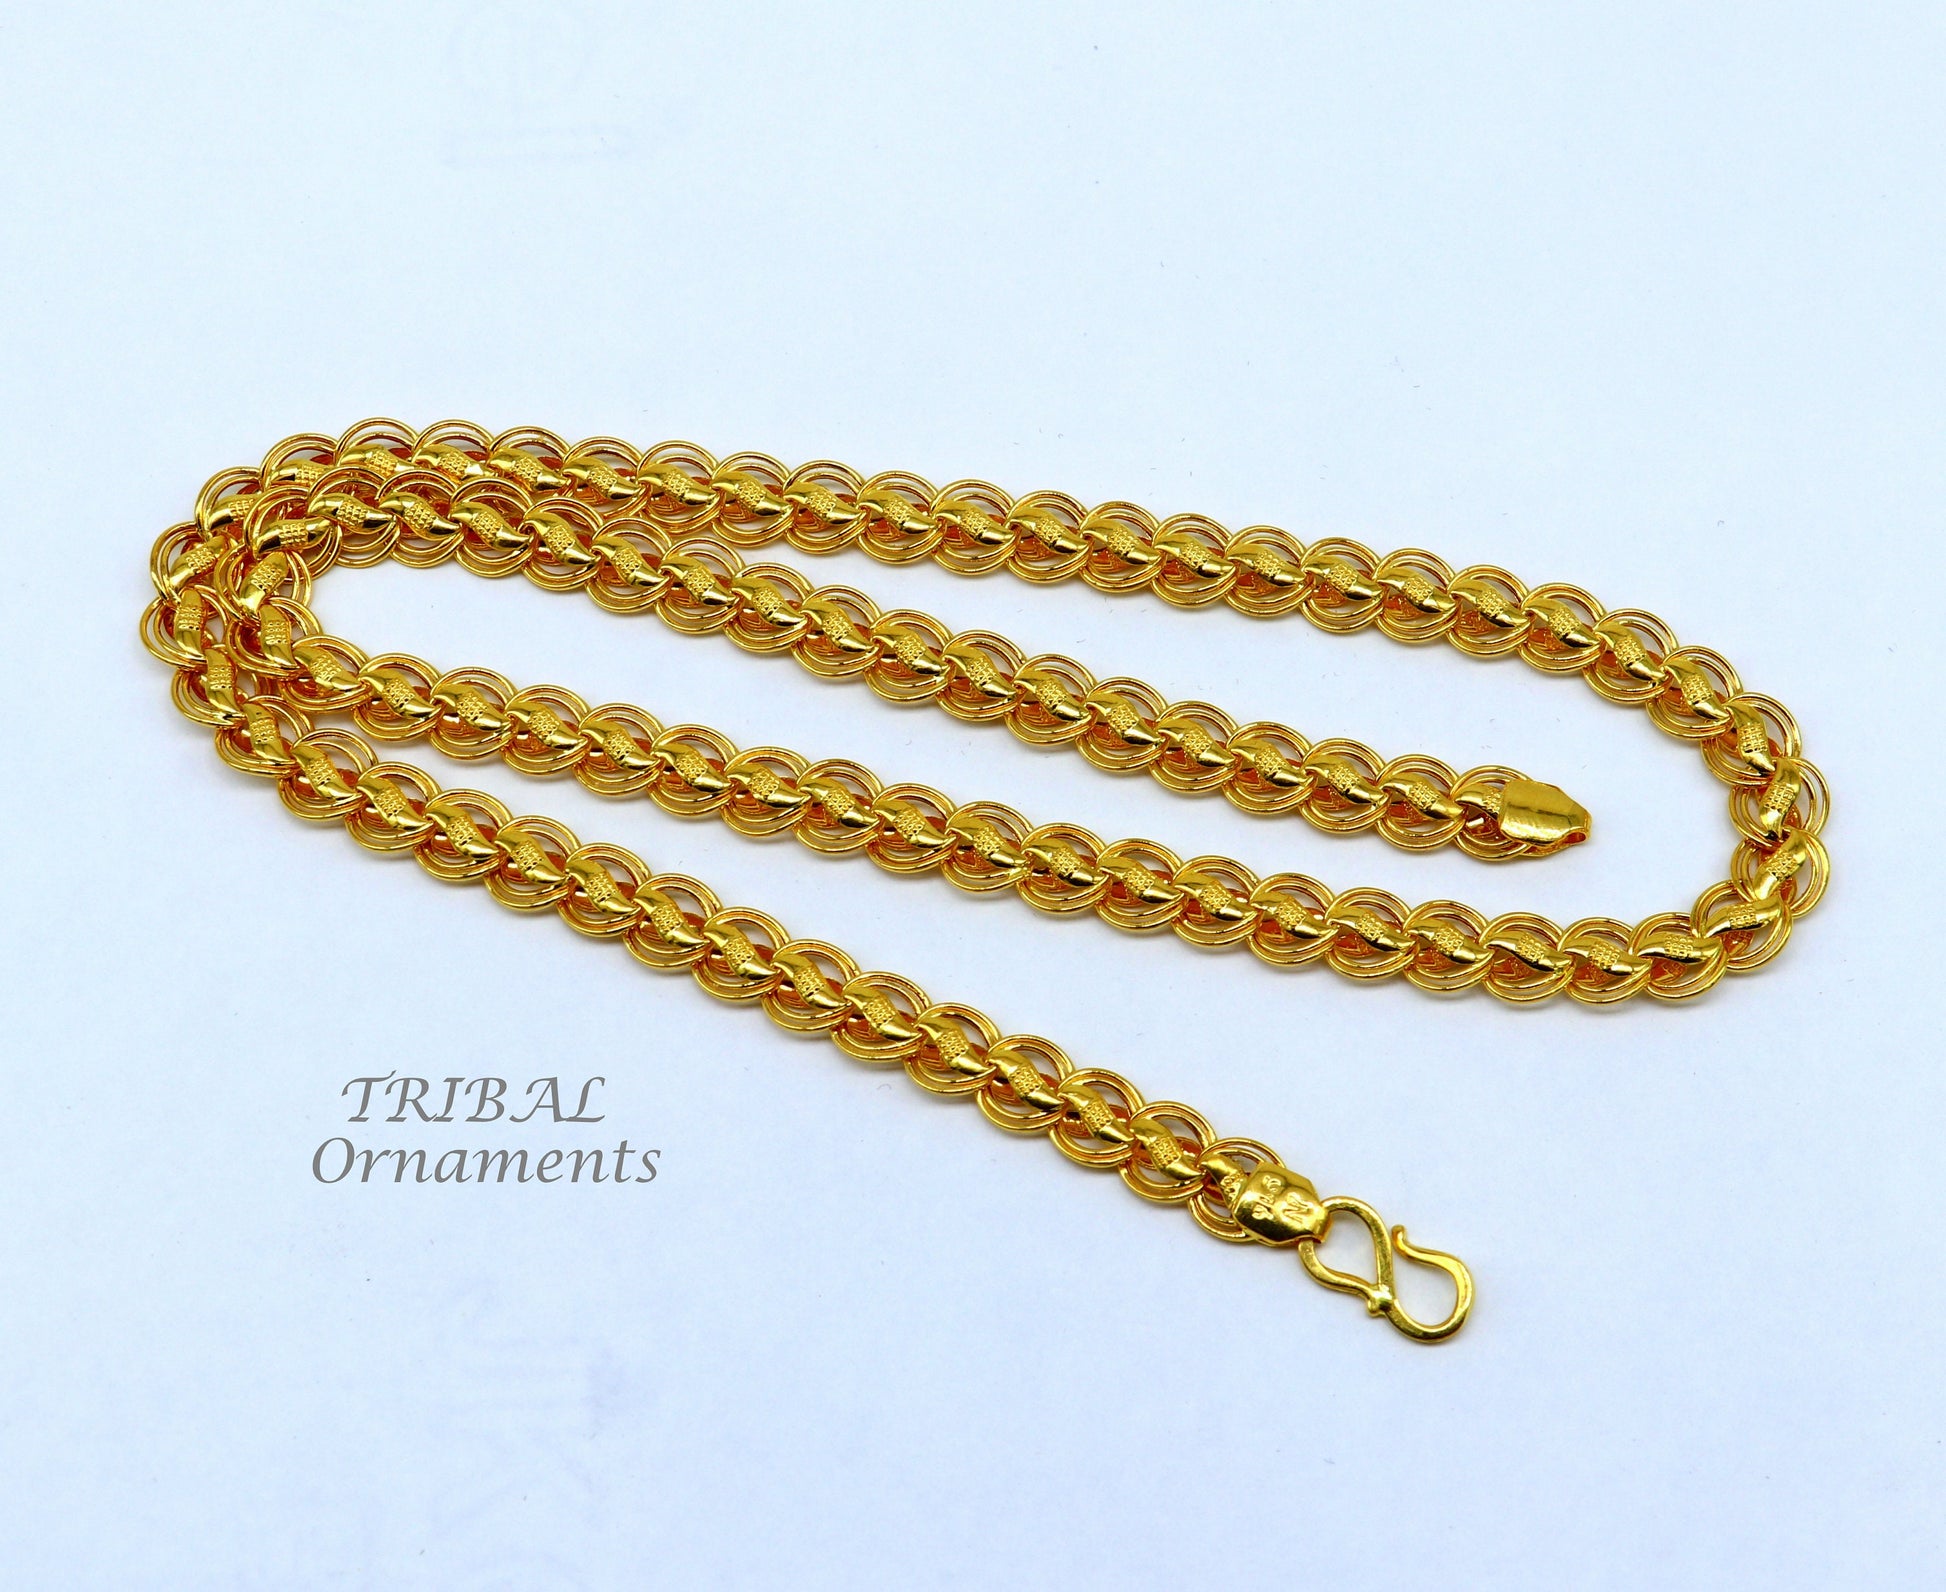 22k yellow gold handmade fabulous Lotus chain necklace excellent gold men's boy's chain certified unique handmade  gifting jewelry ch570 - TRIBAL ORNAMENTS